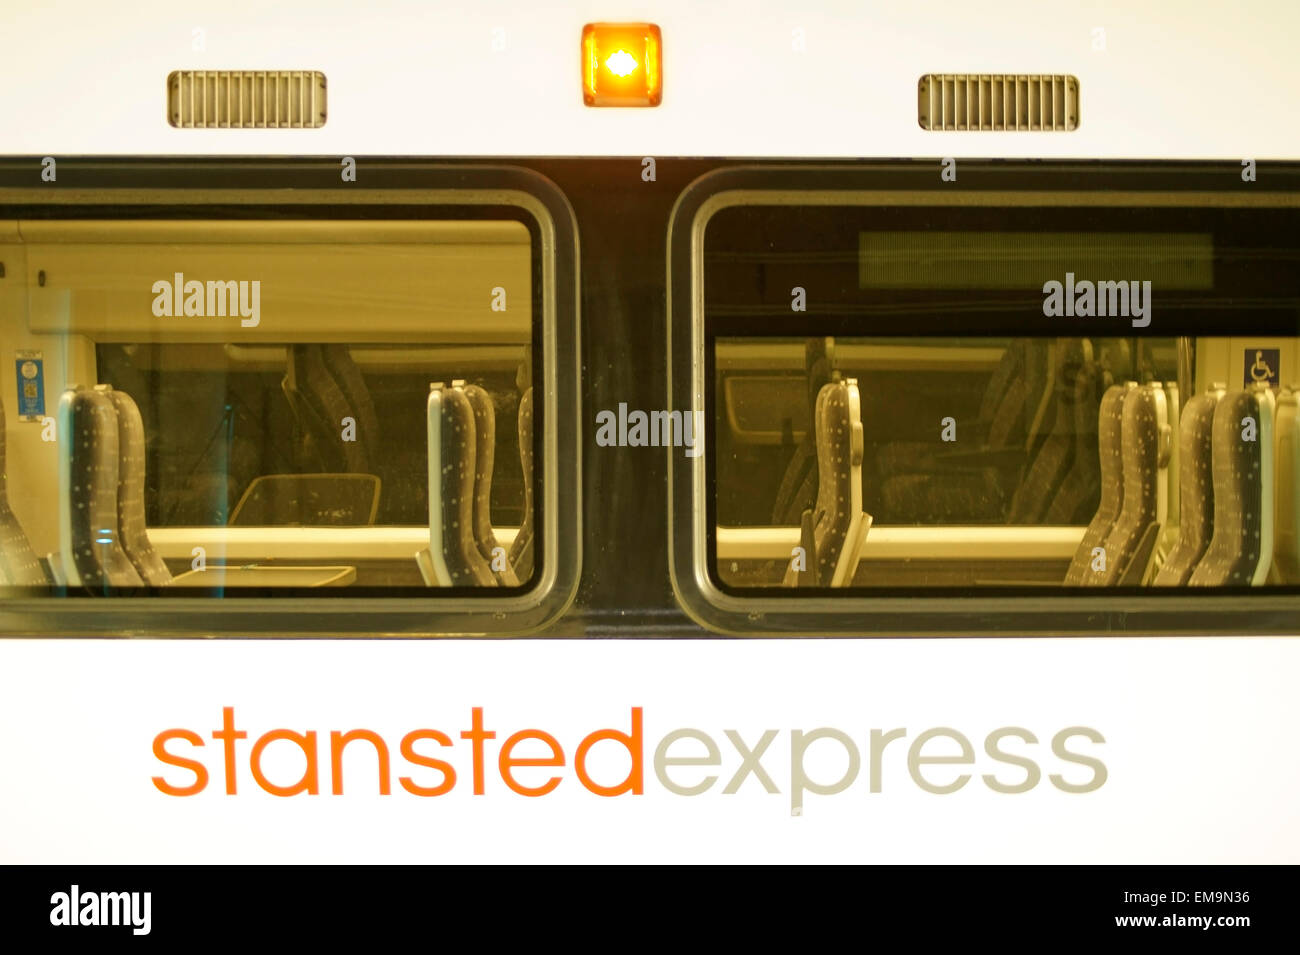 Stansted Express train Stock Photo